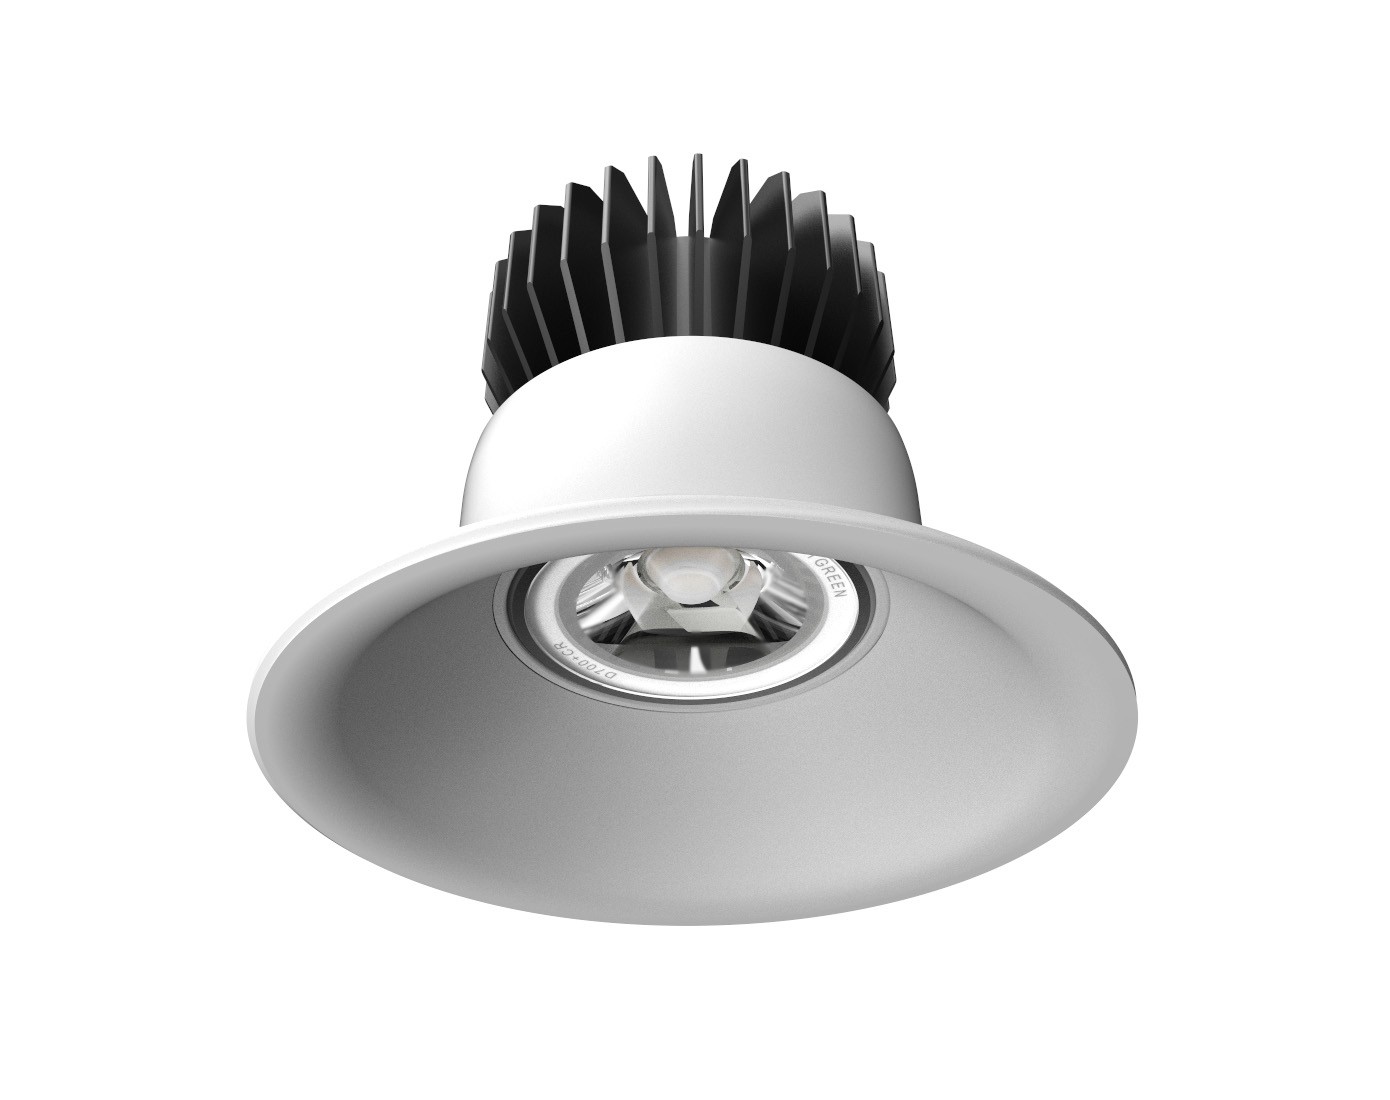 Architectural LED Downlight